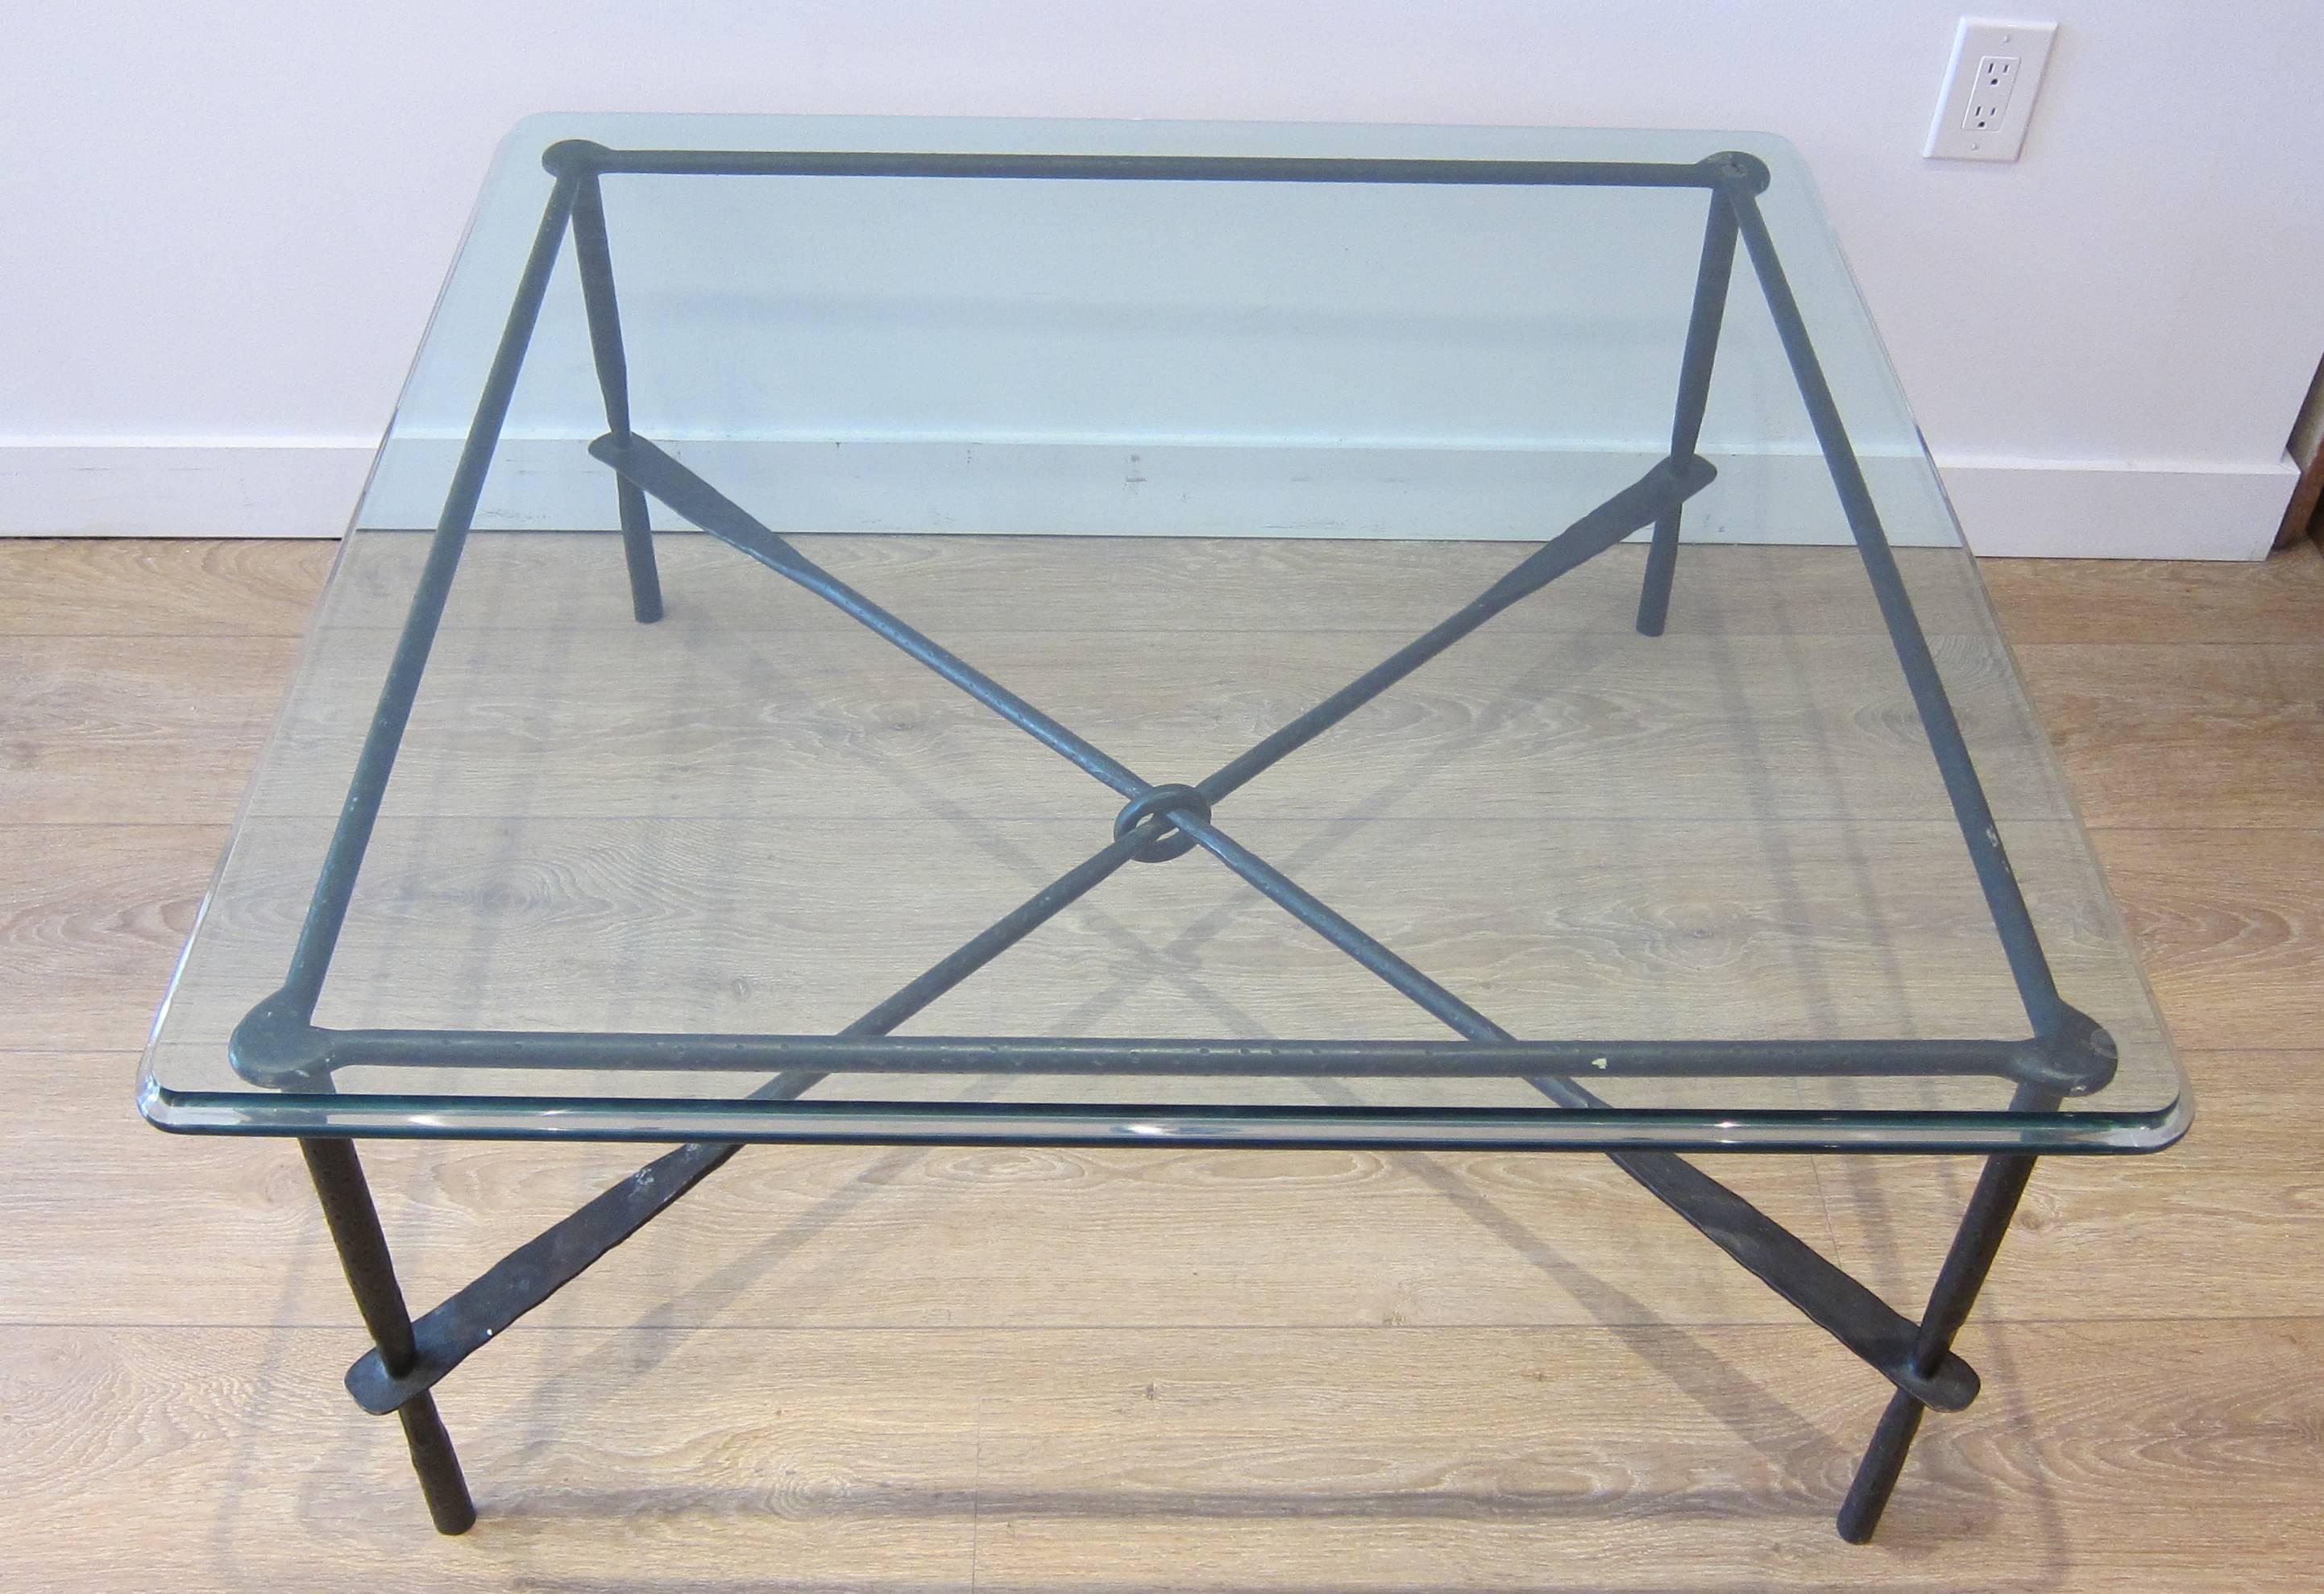 Giacometti inspired coffee table. Hammered and forged iron with oil rubbed bronze patina. Beveled edge clear glass top. Cross beam stretcher knotted at the center. Very good condition, consistent with age and use. 
For additional questions regarding